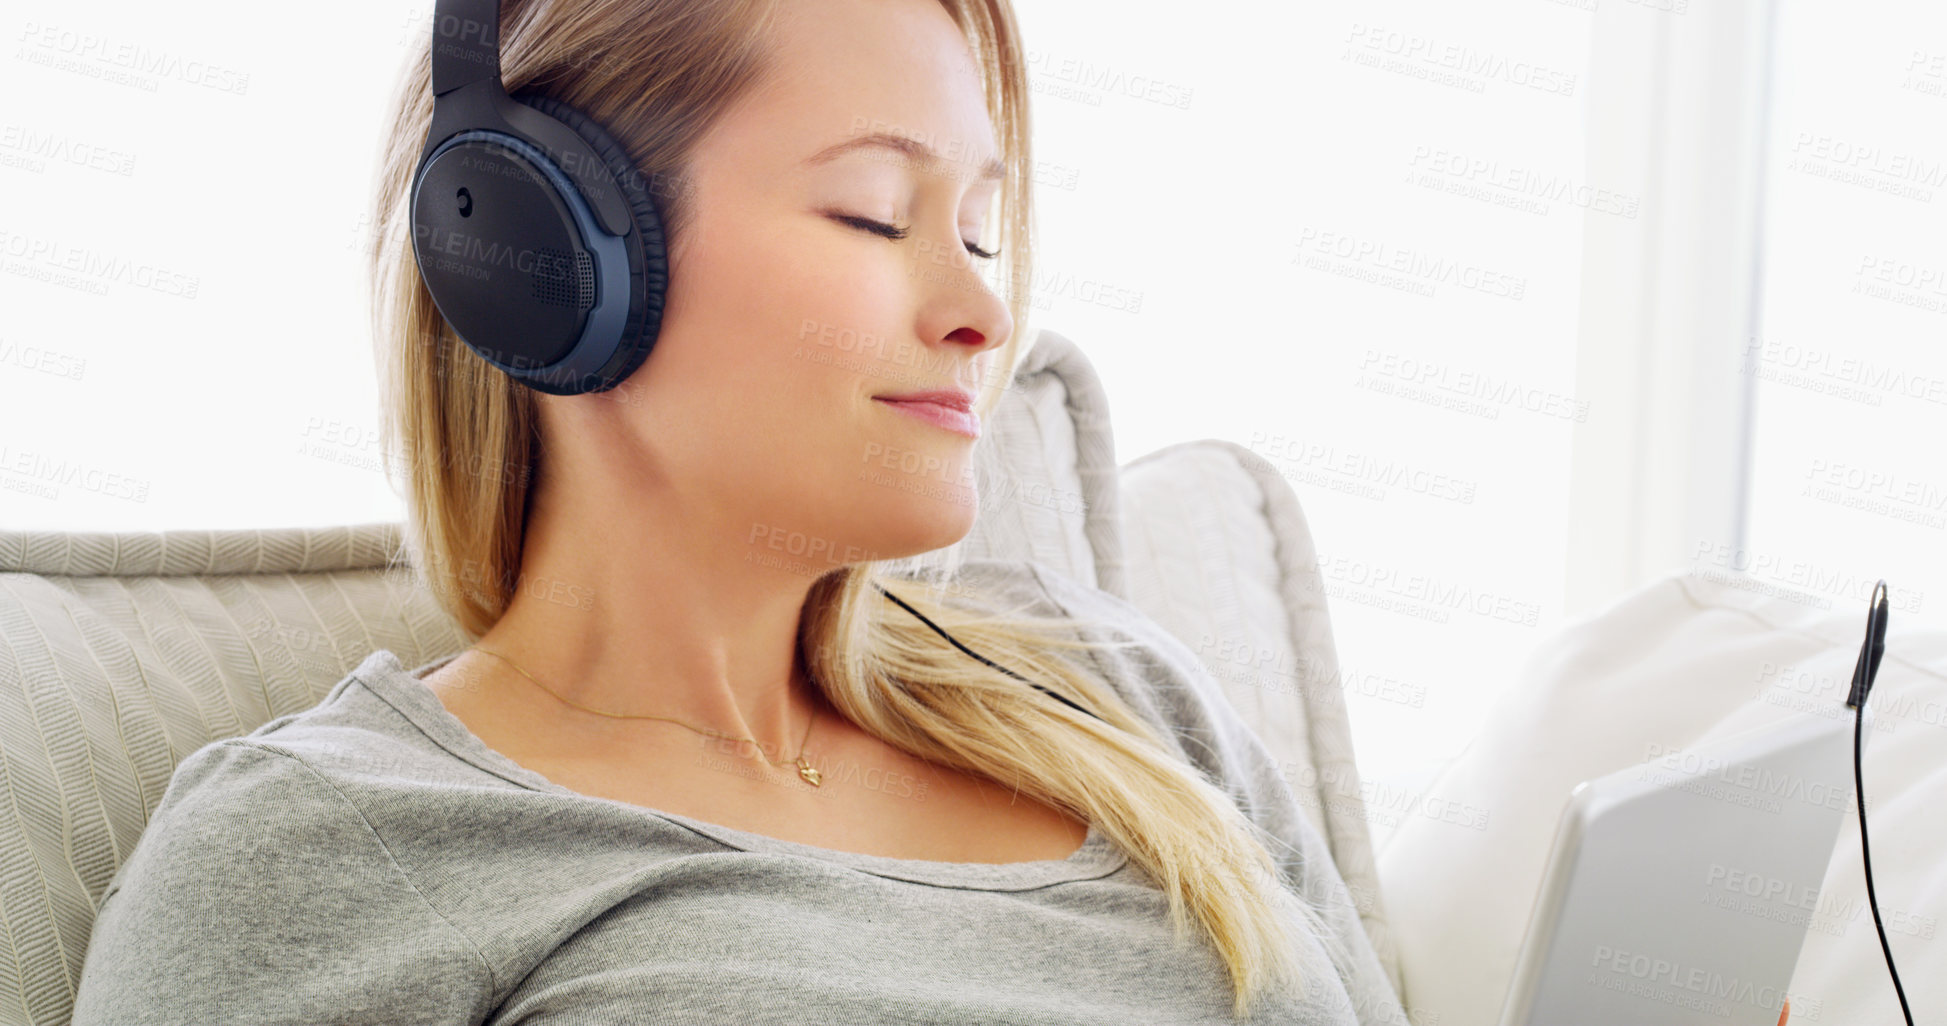 Buy stock photo Shot of an attractive young woman listening to music with headphones at home